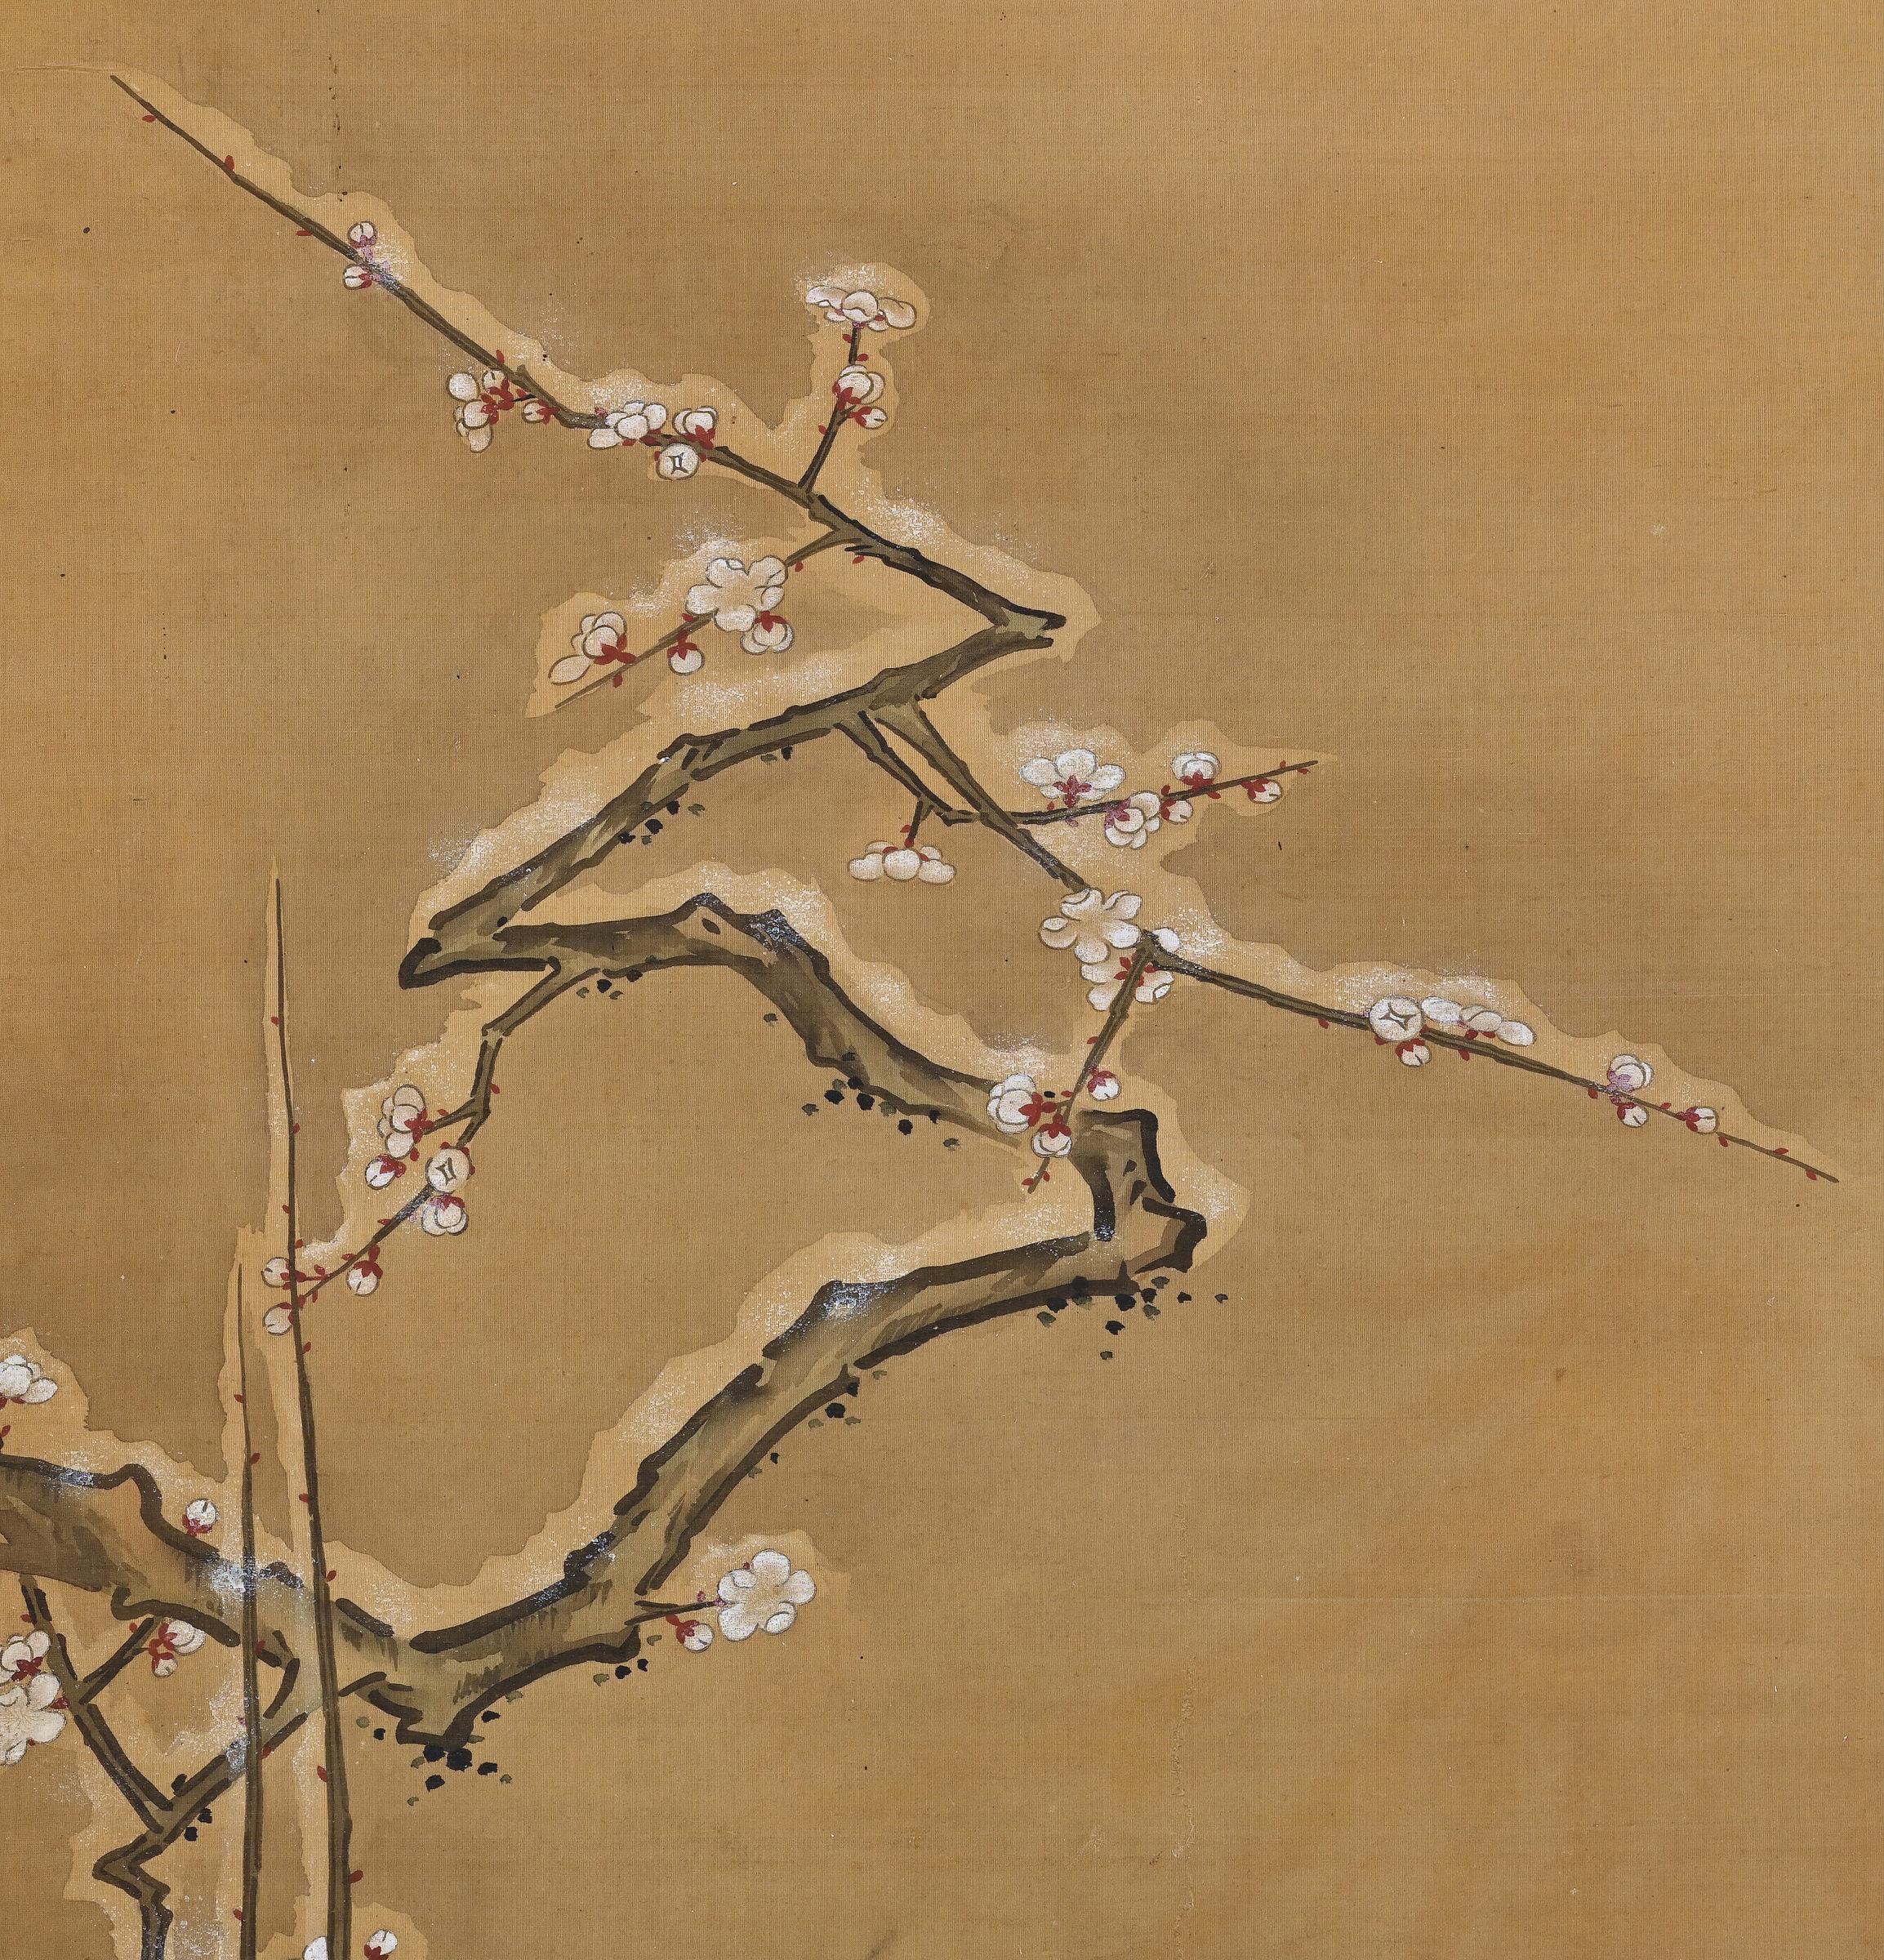 what do the peacocks and the birds symbolize in the silk painting above